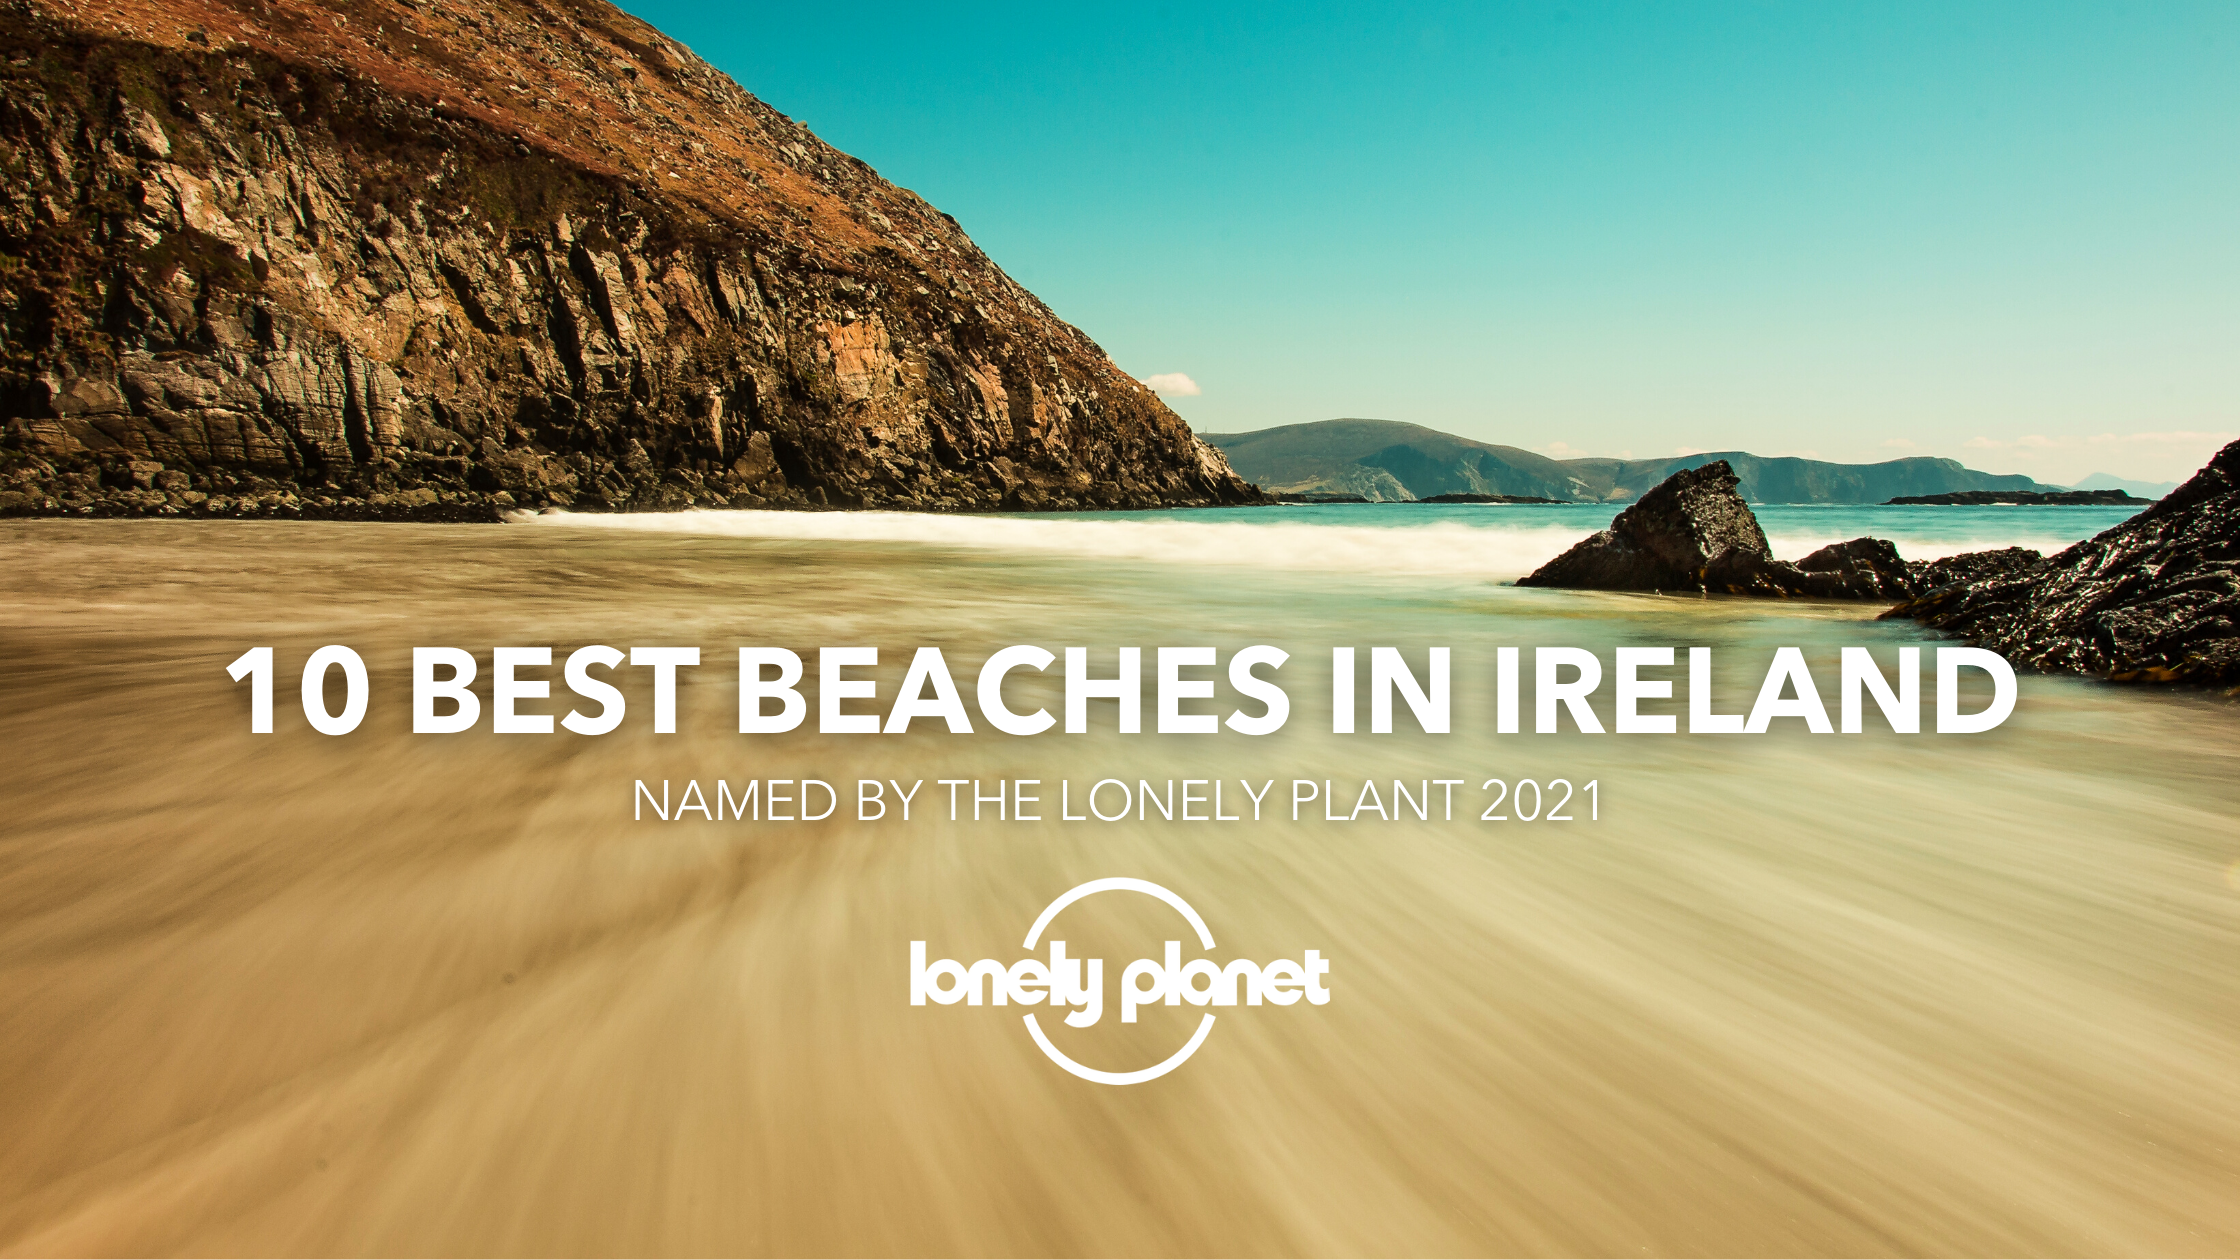 Top 10 Best Beaches in Ireland according to the Lonely Planet 2021